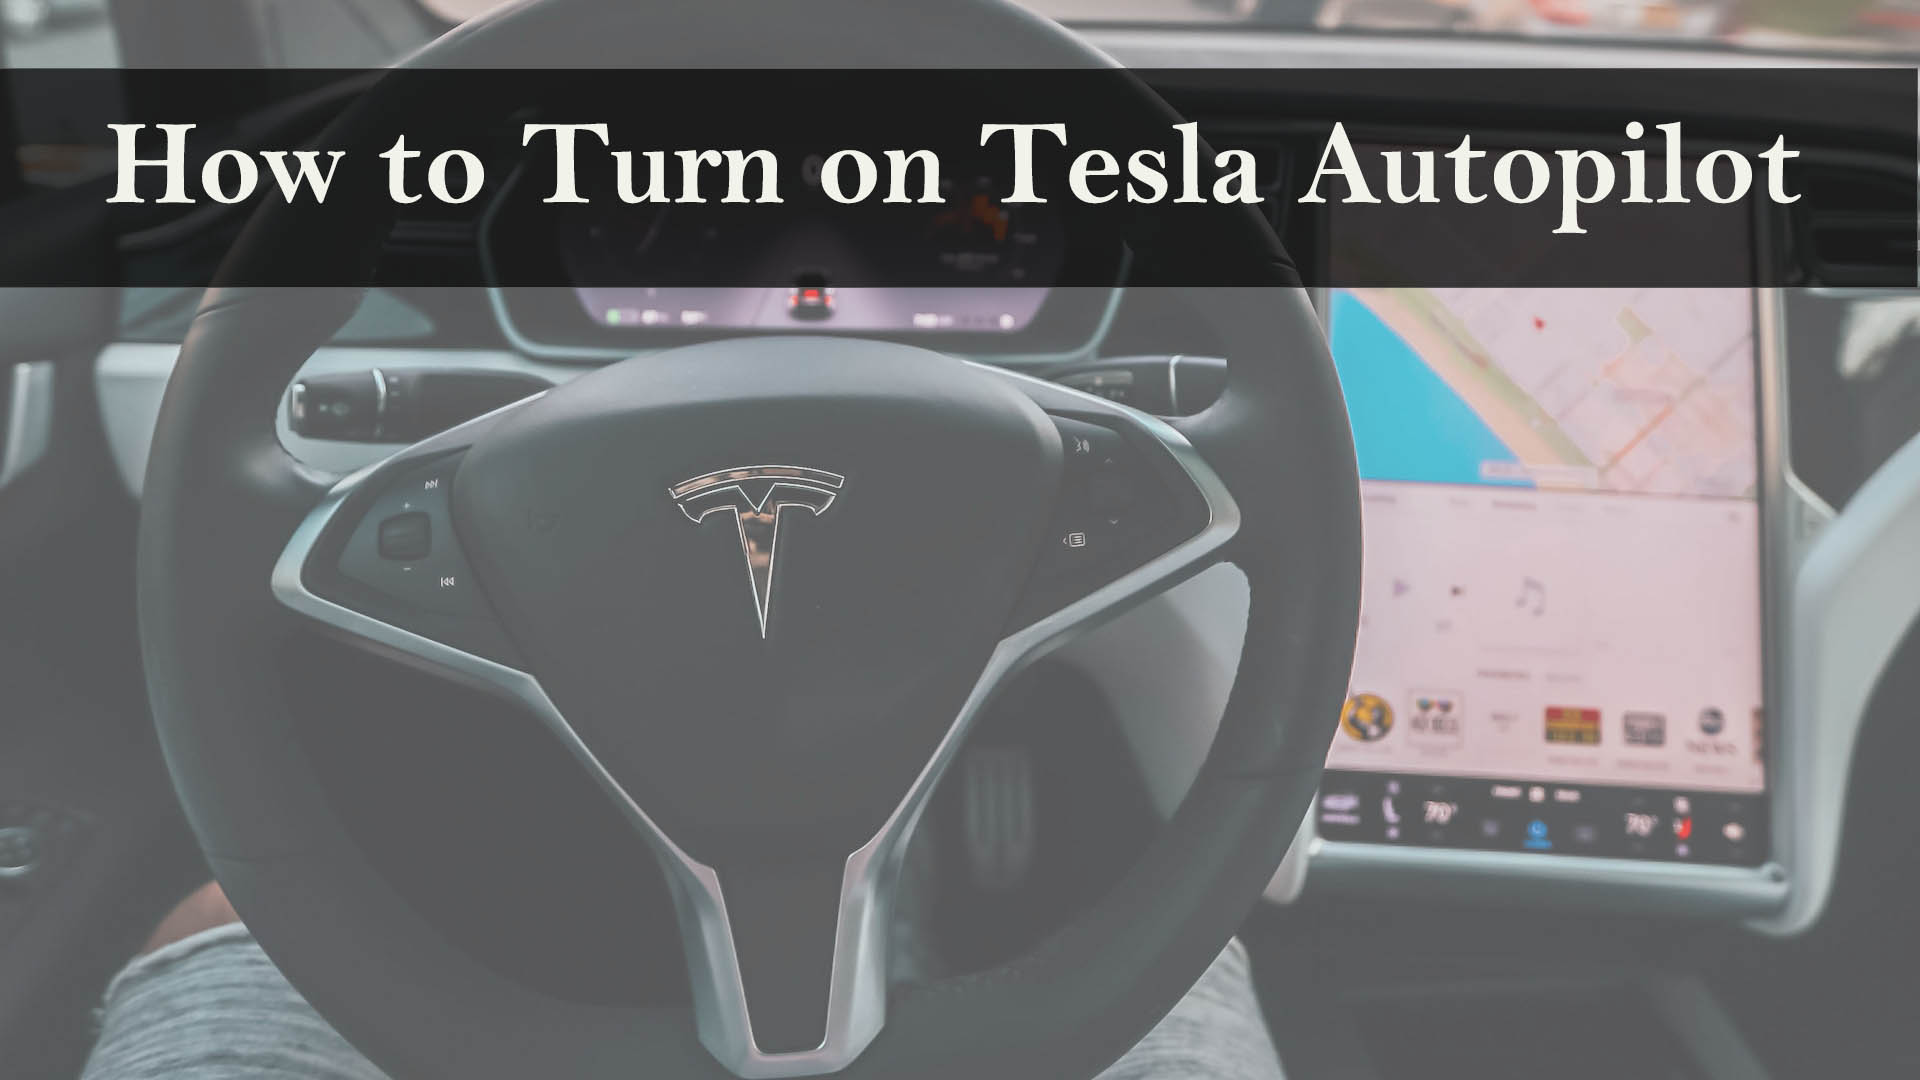 How to Turn on Tesla Autopilot – Detailed Guide